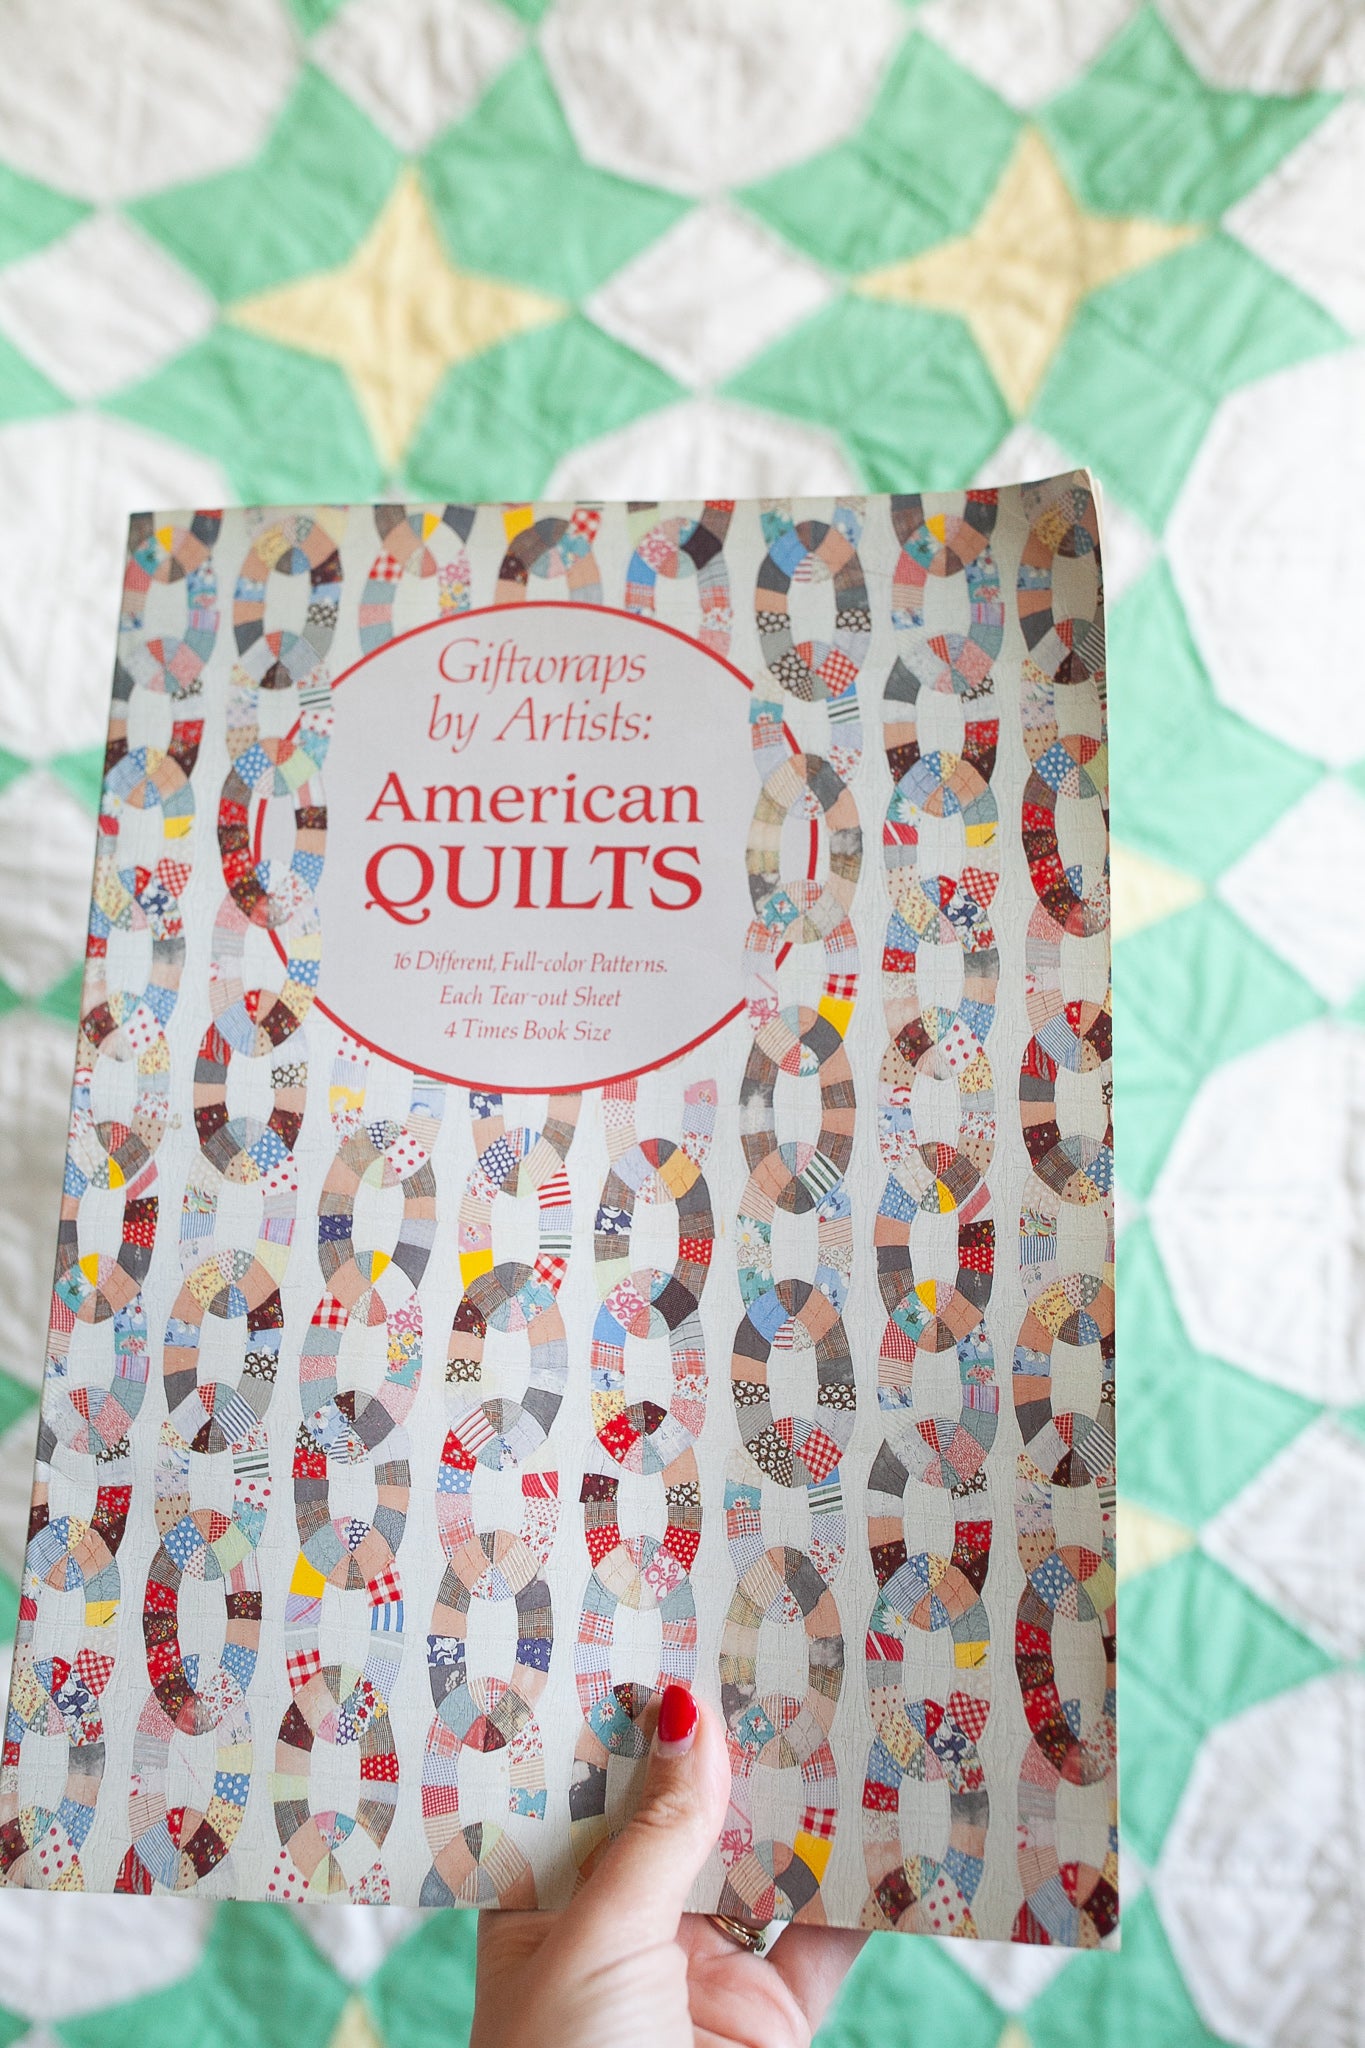 American Quilts Book - Giftwrap by Artists 16 Different full color patterns